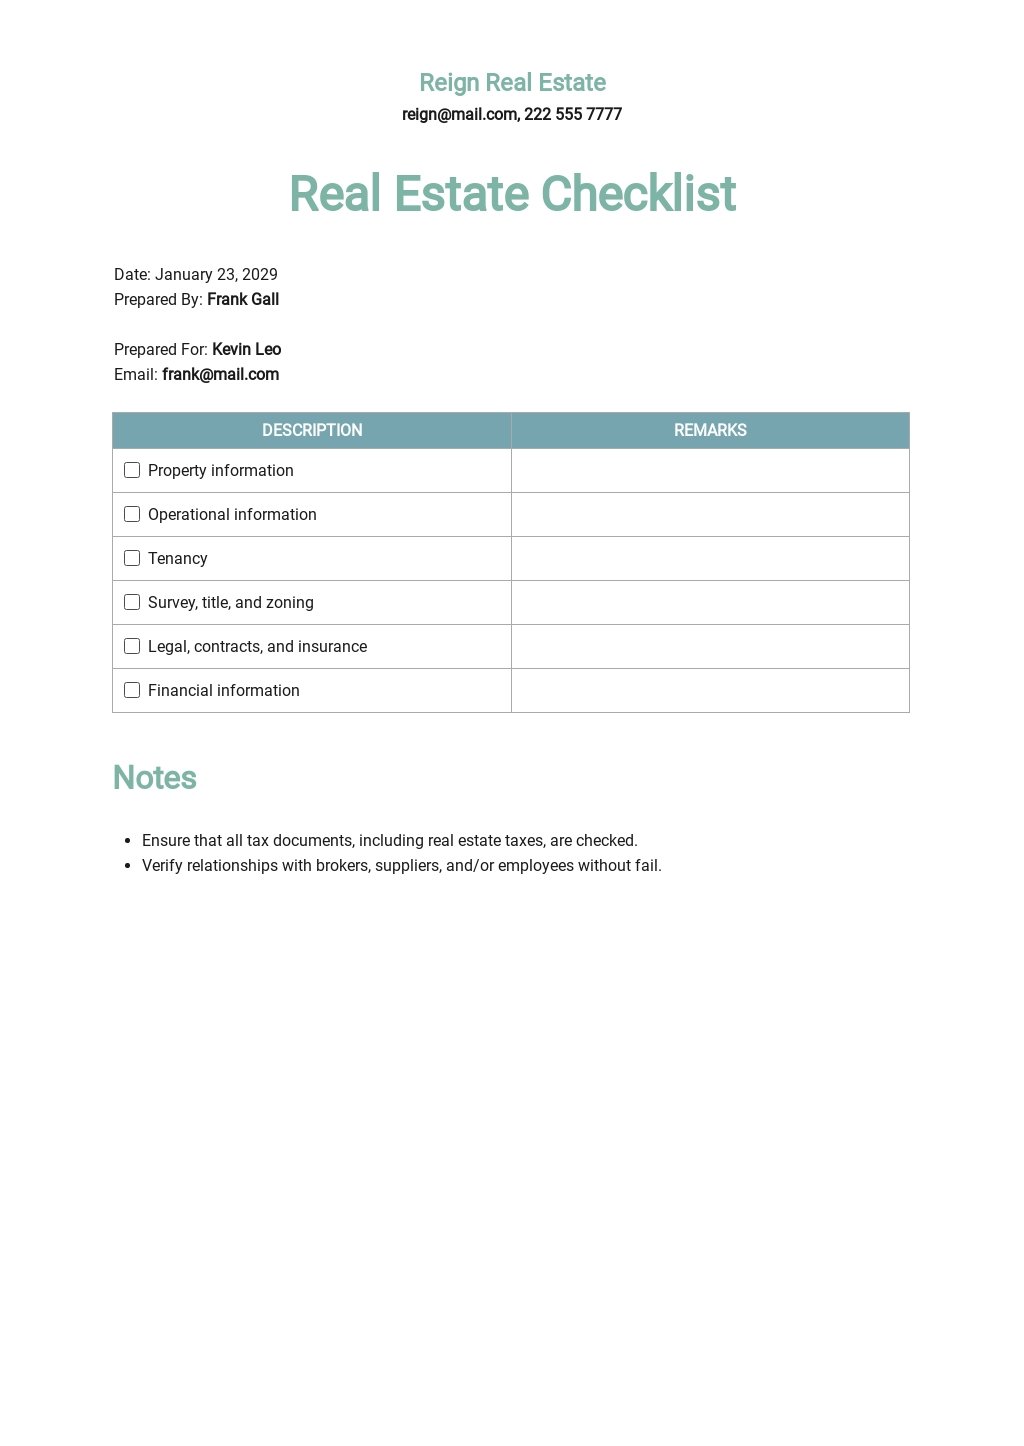 Free Commercial Real Estate Checklist Template.jpe